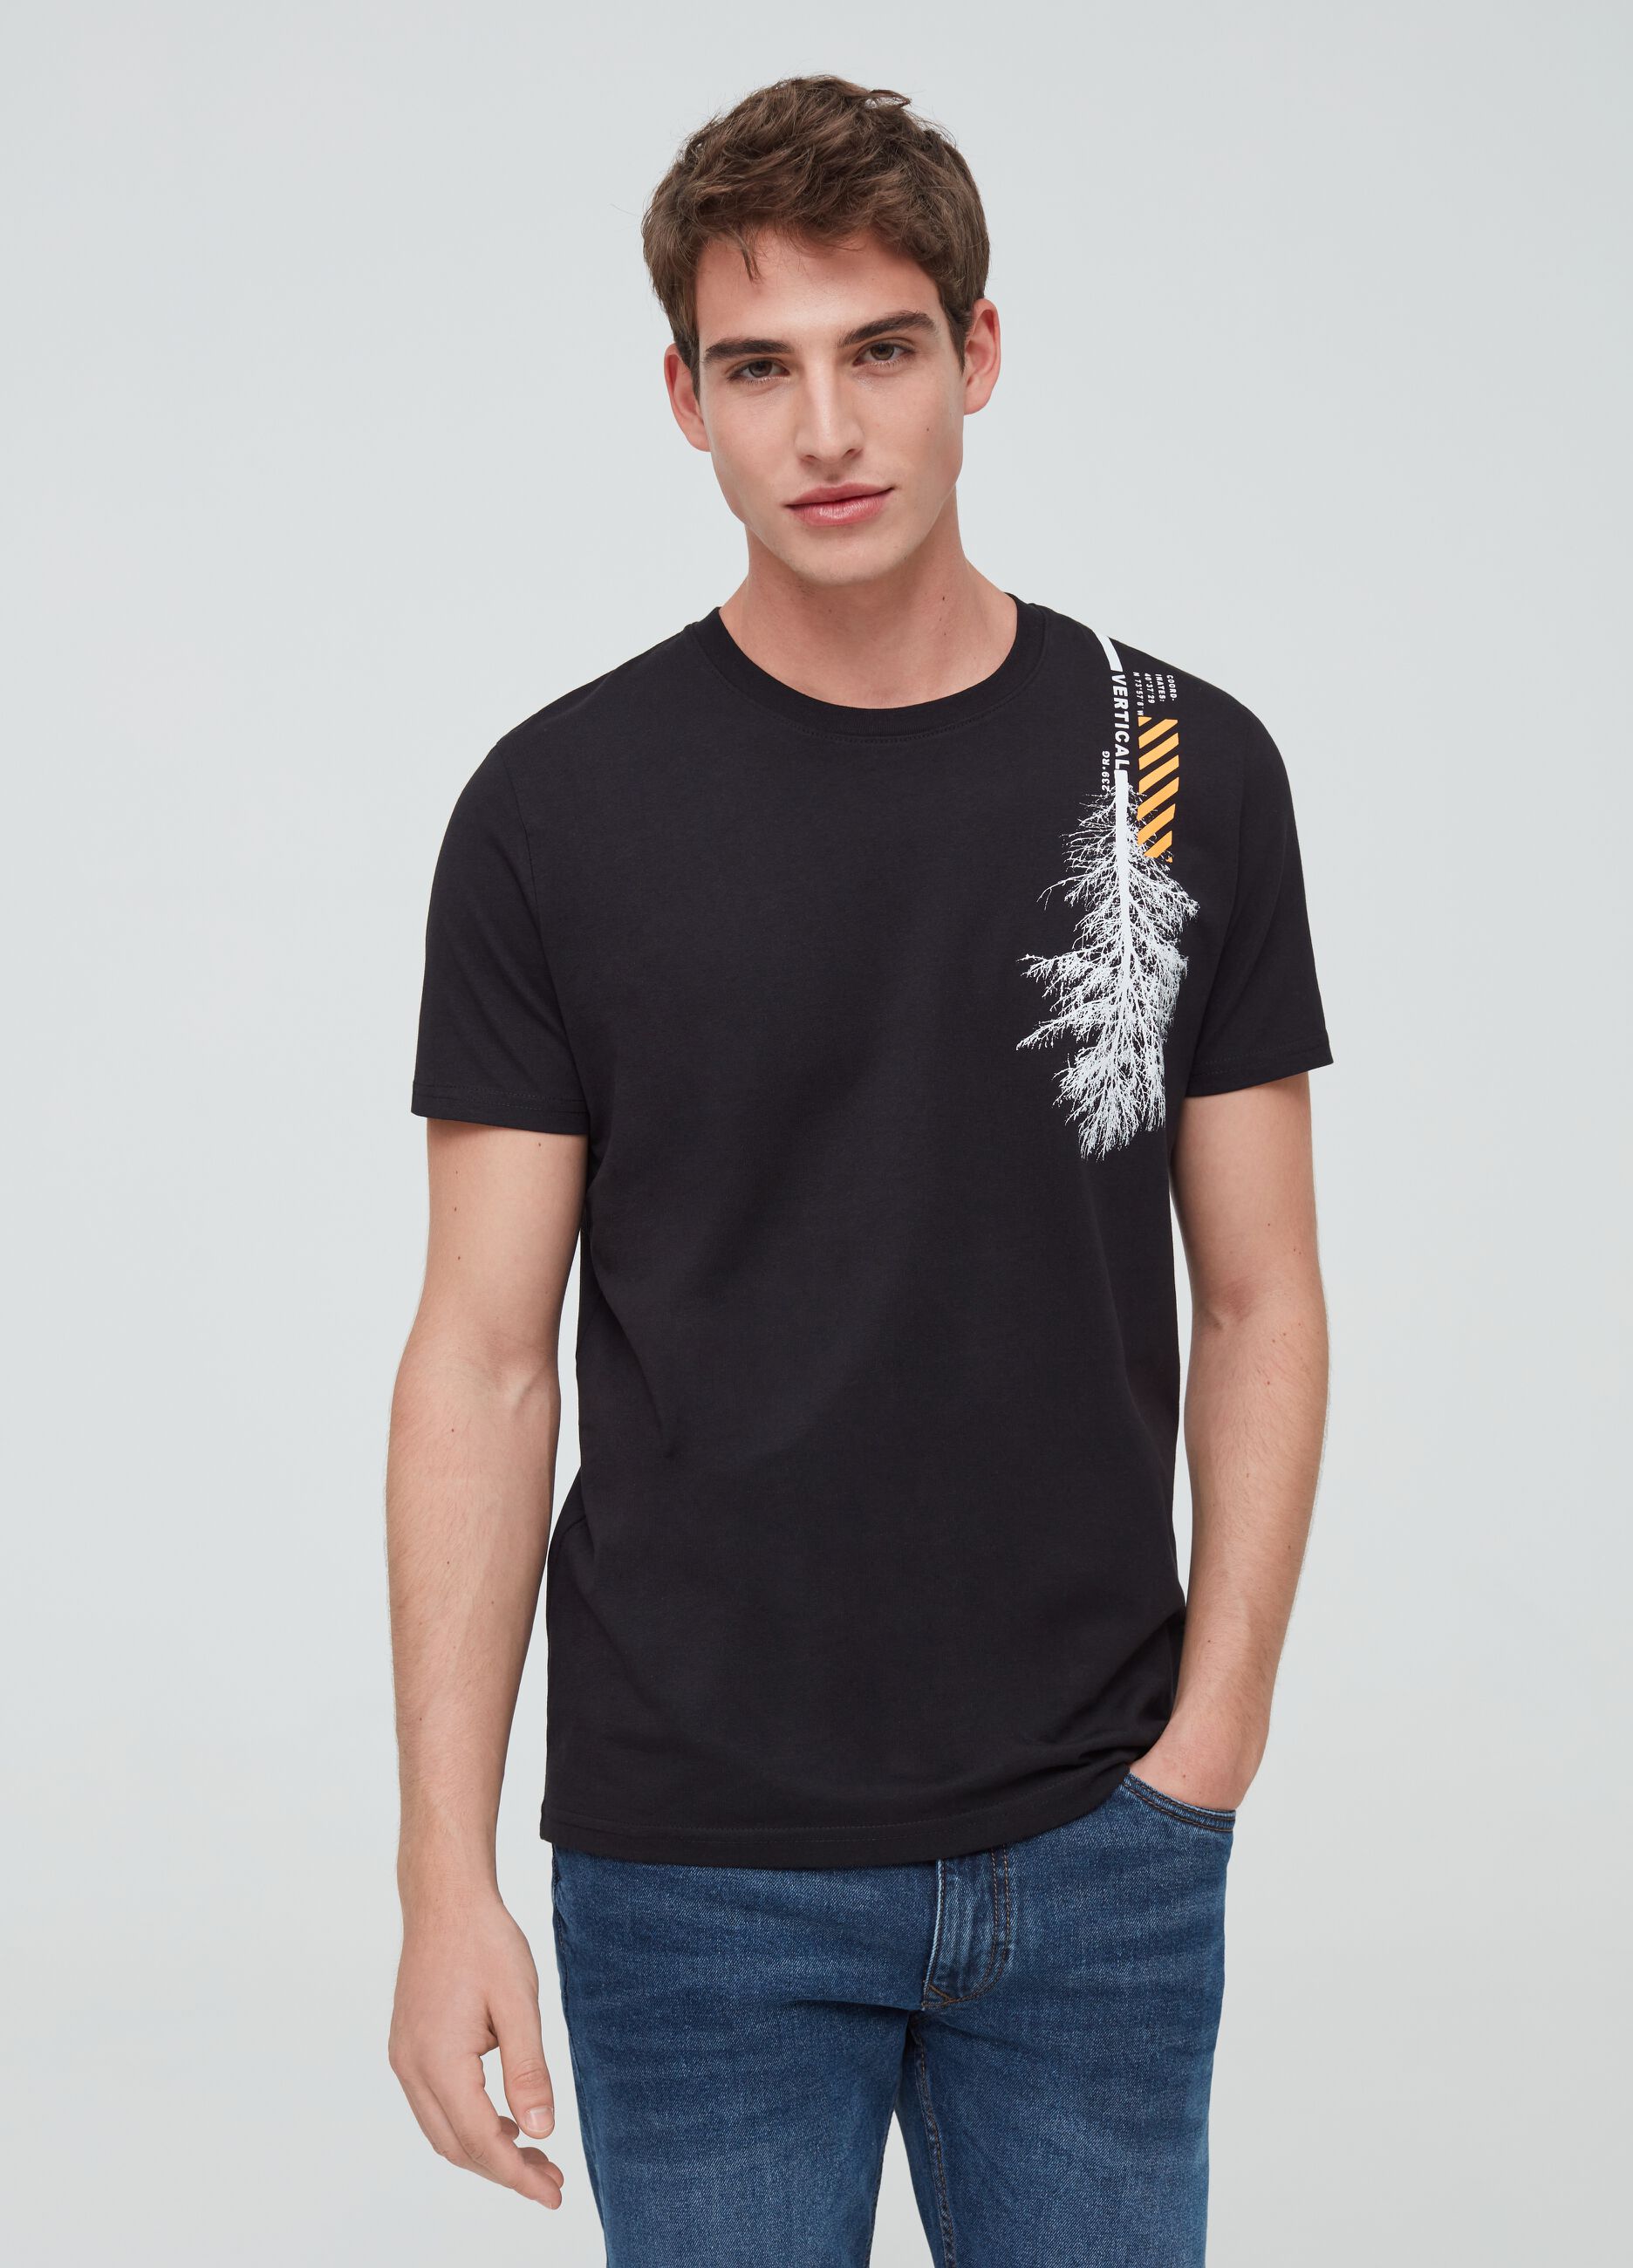 100% cotton T-shirt with tree print